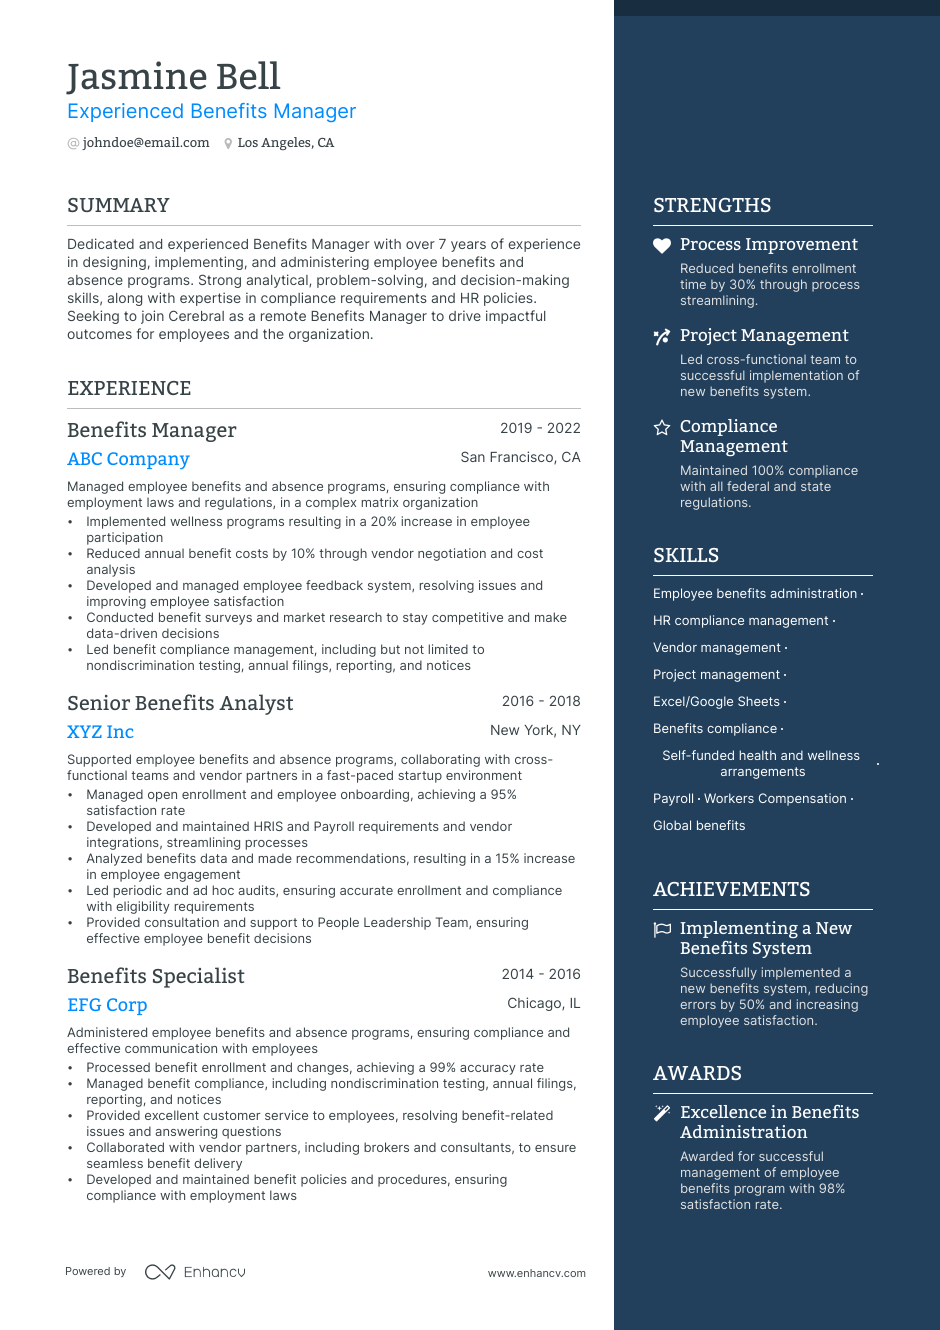 Benefits Manager resume example